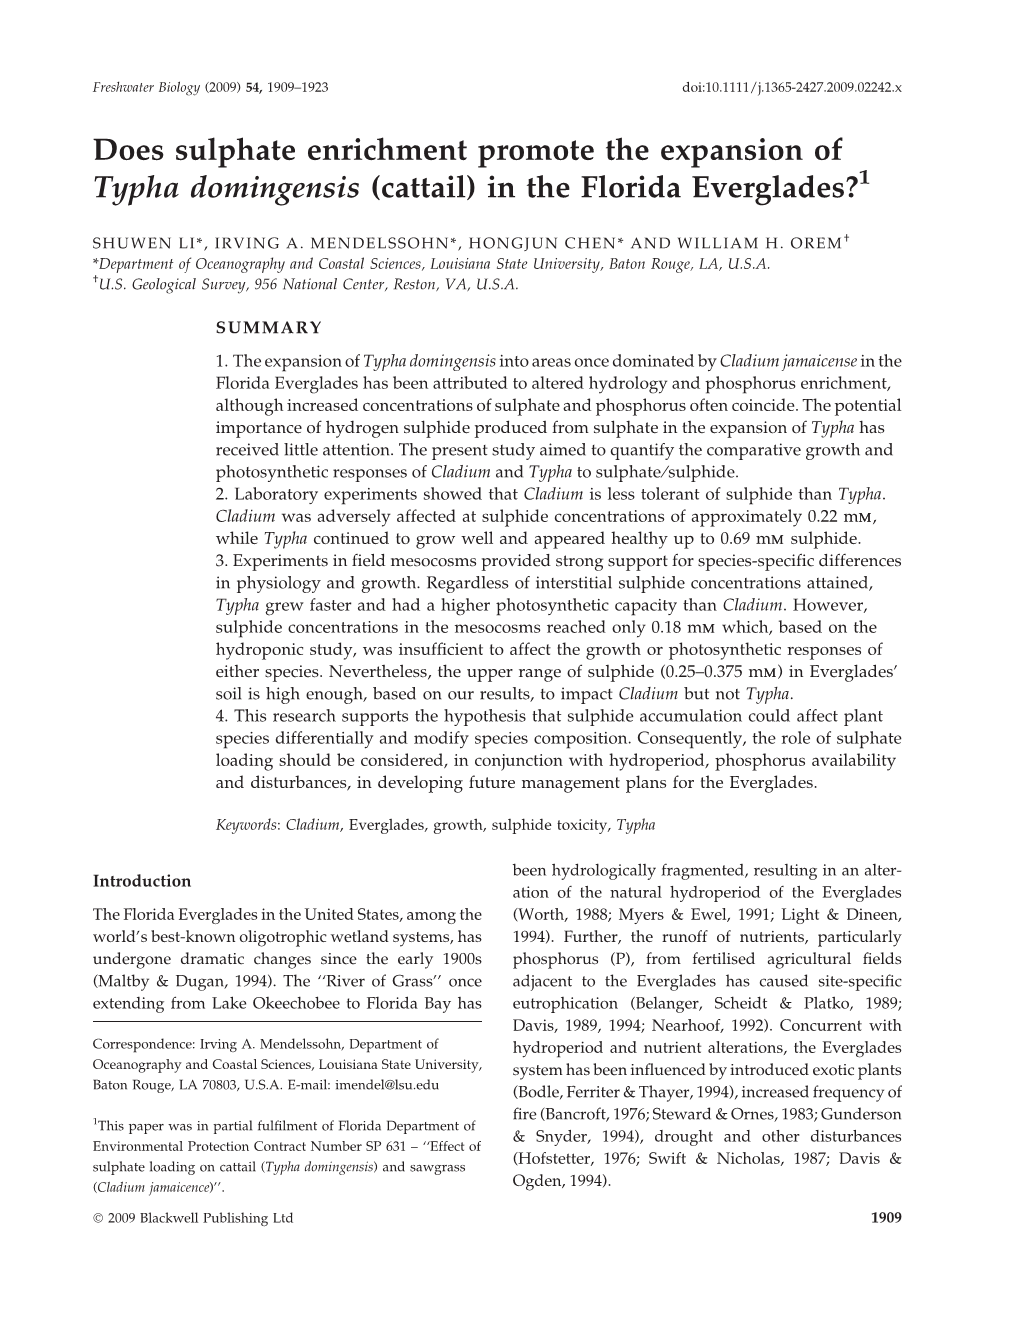 Does Sulphate Enrichment Promote the Expansion of Typha Domingensis (Cattail) in the Florida Everglades?1